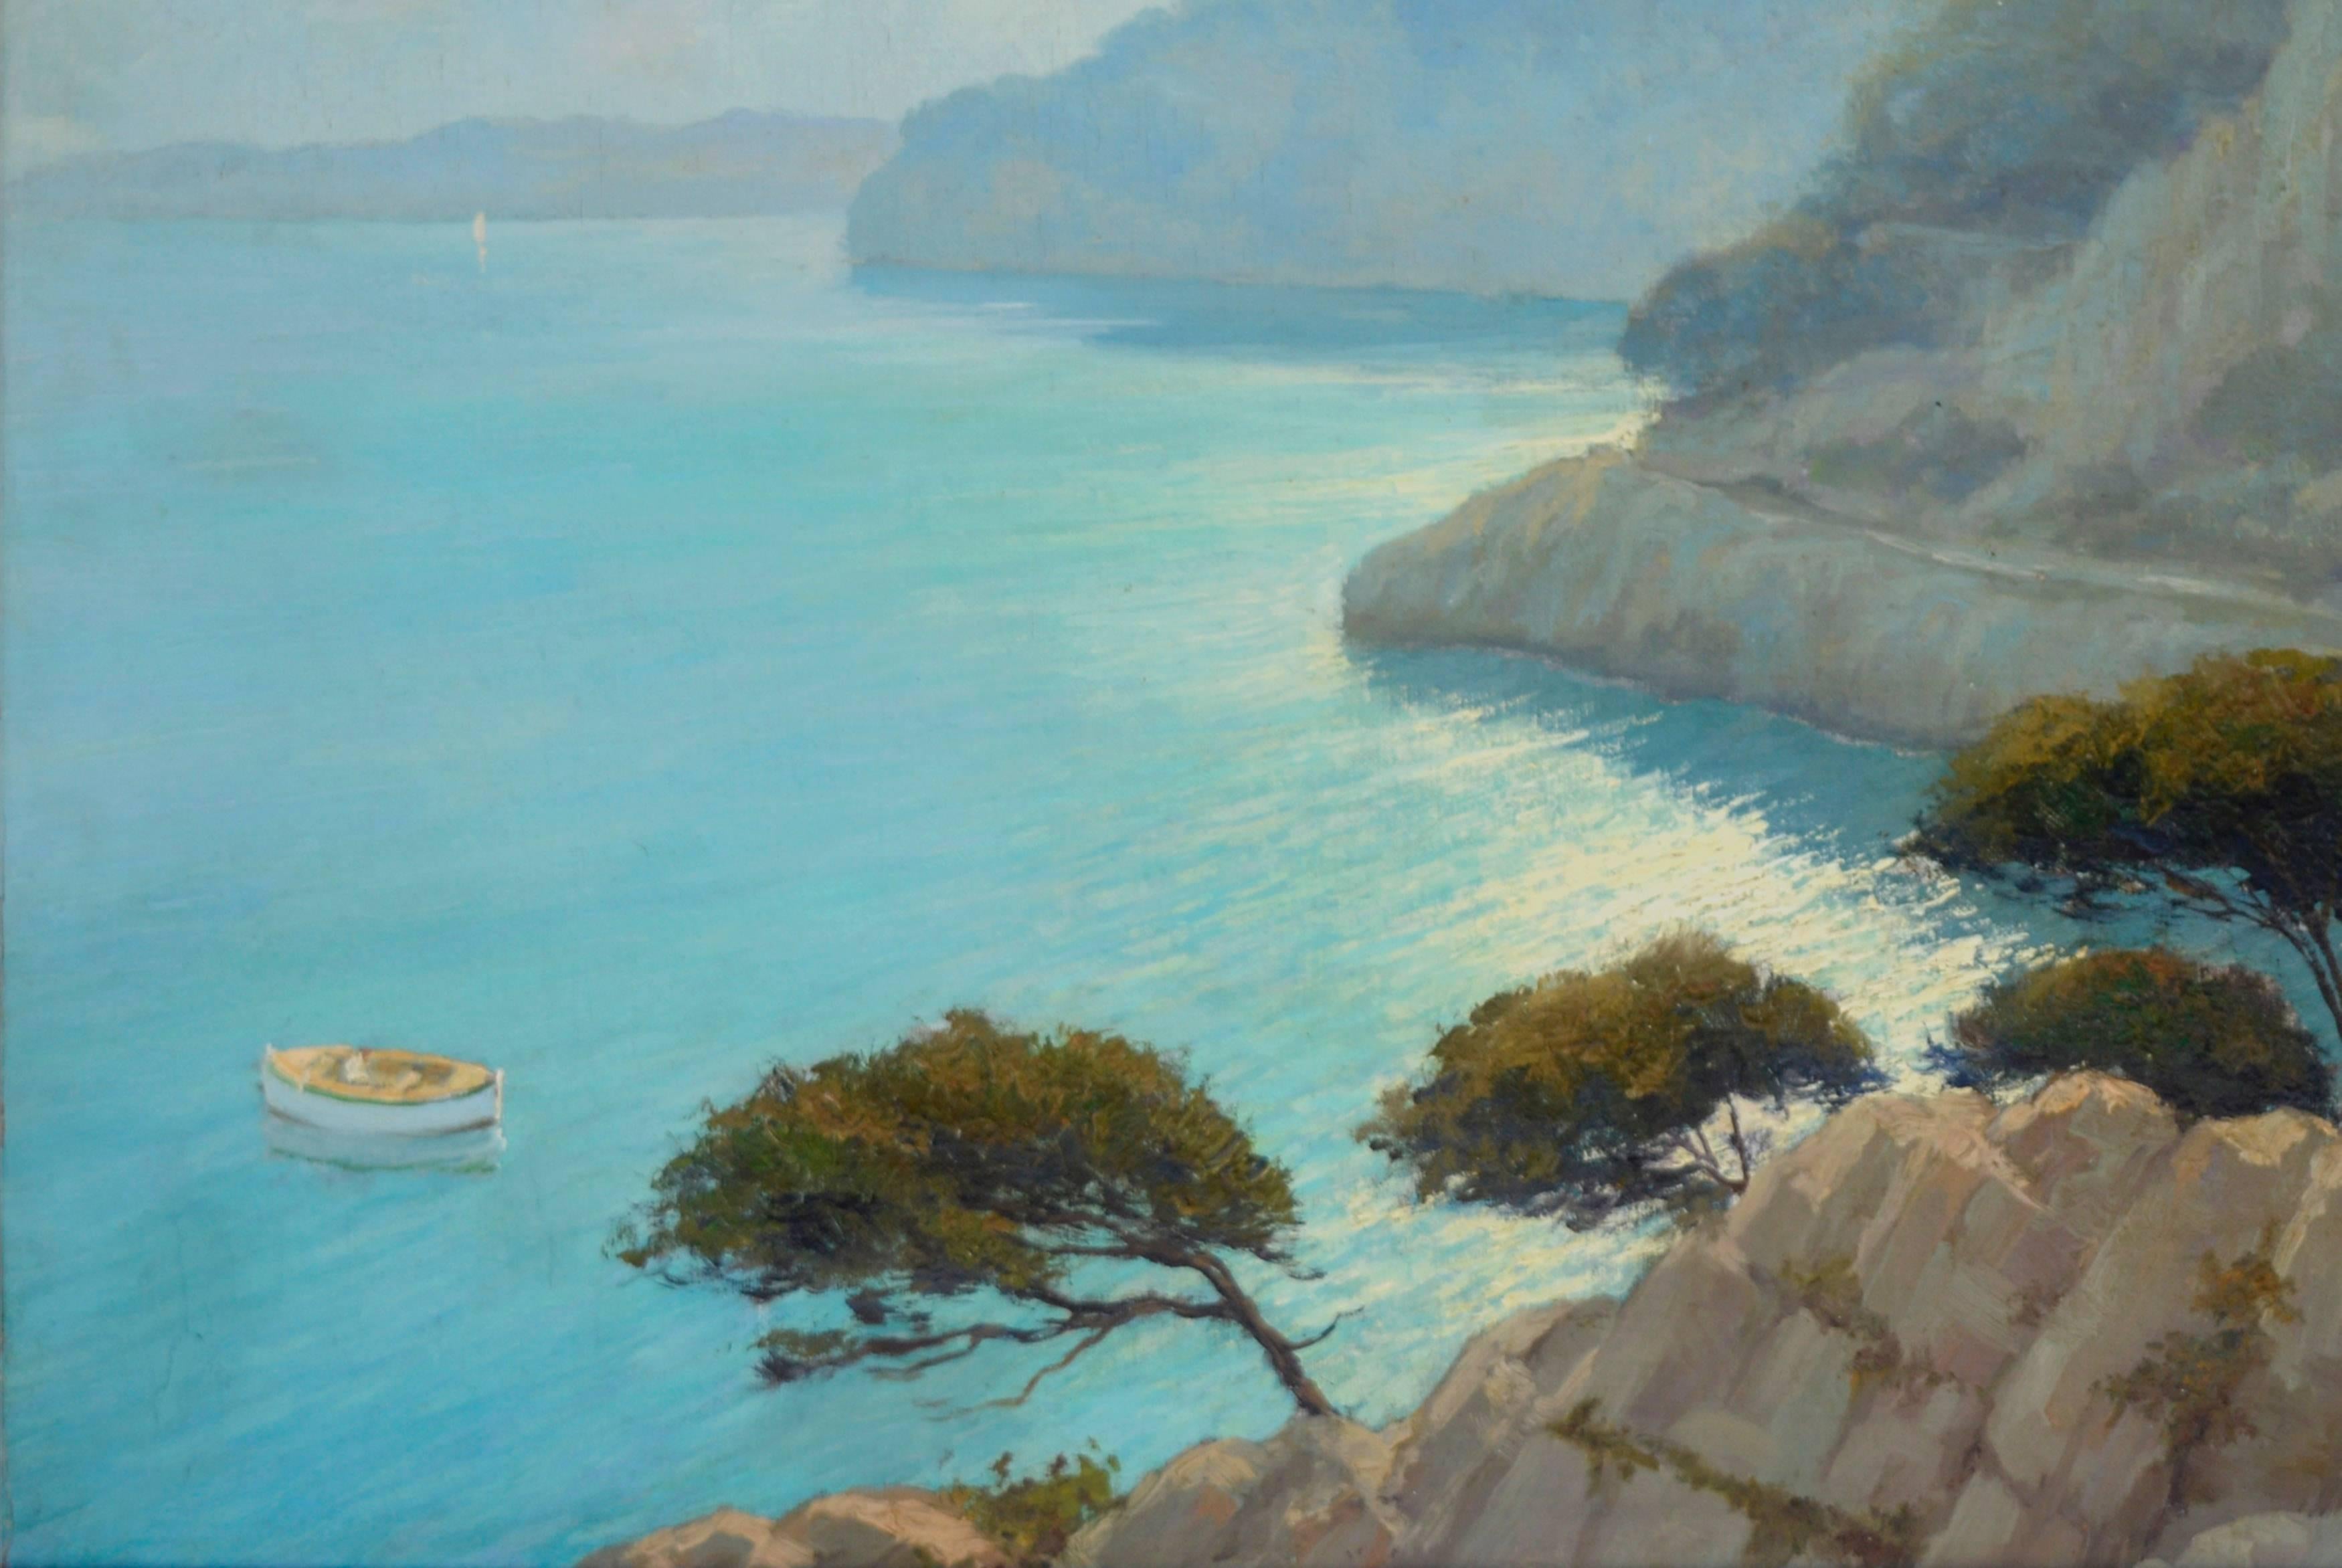 Cape d'Antibes  - Painting by Louis Mery